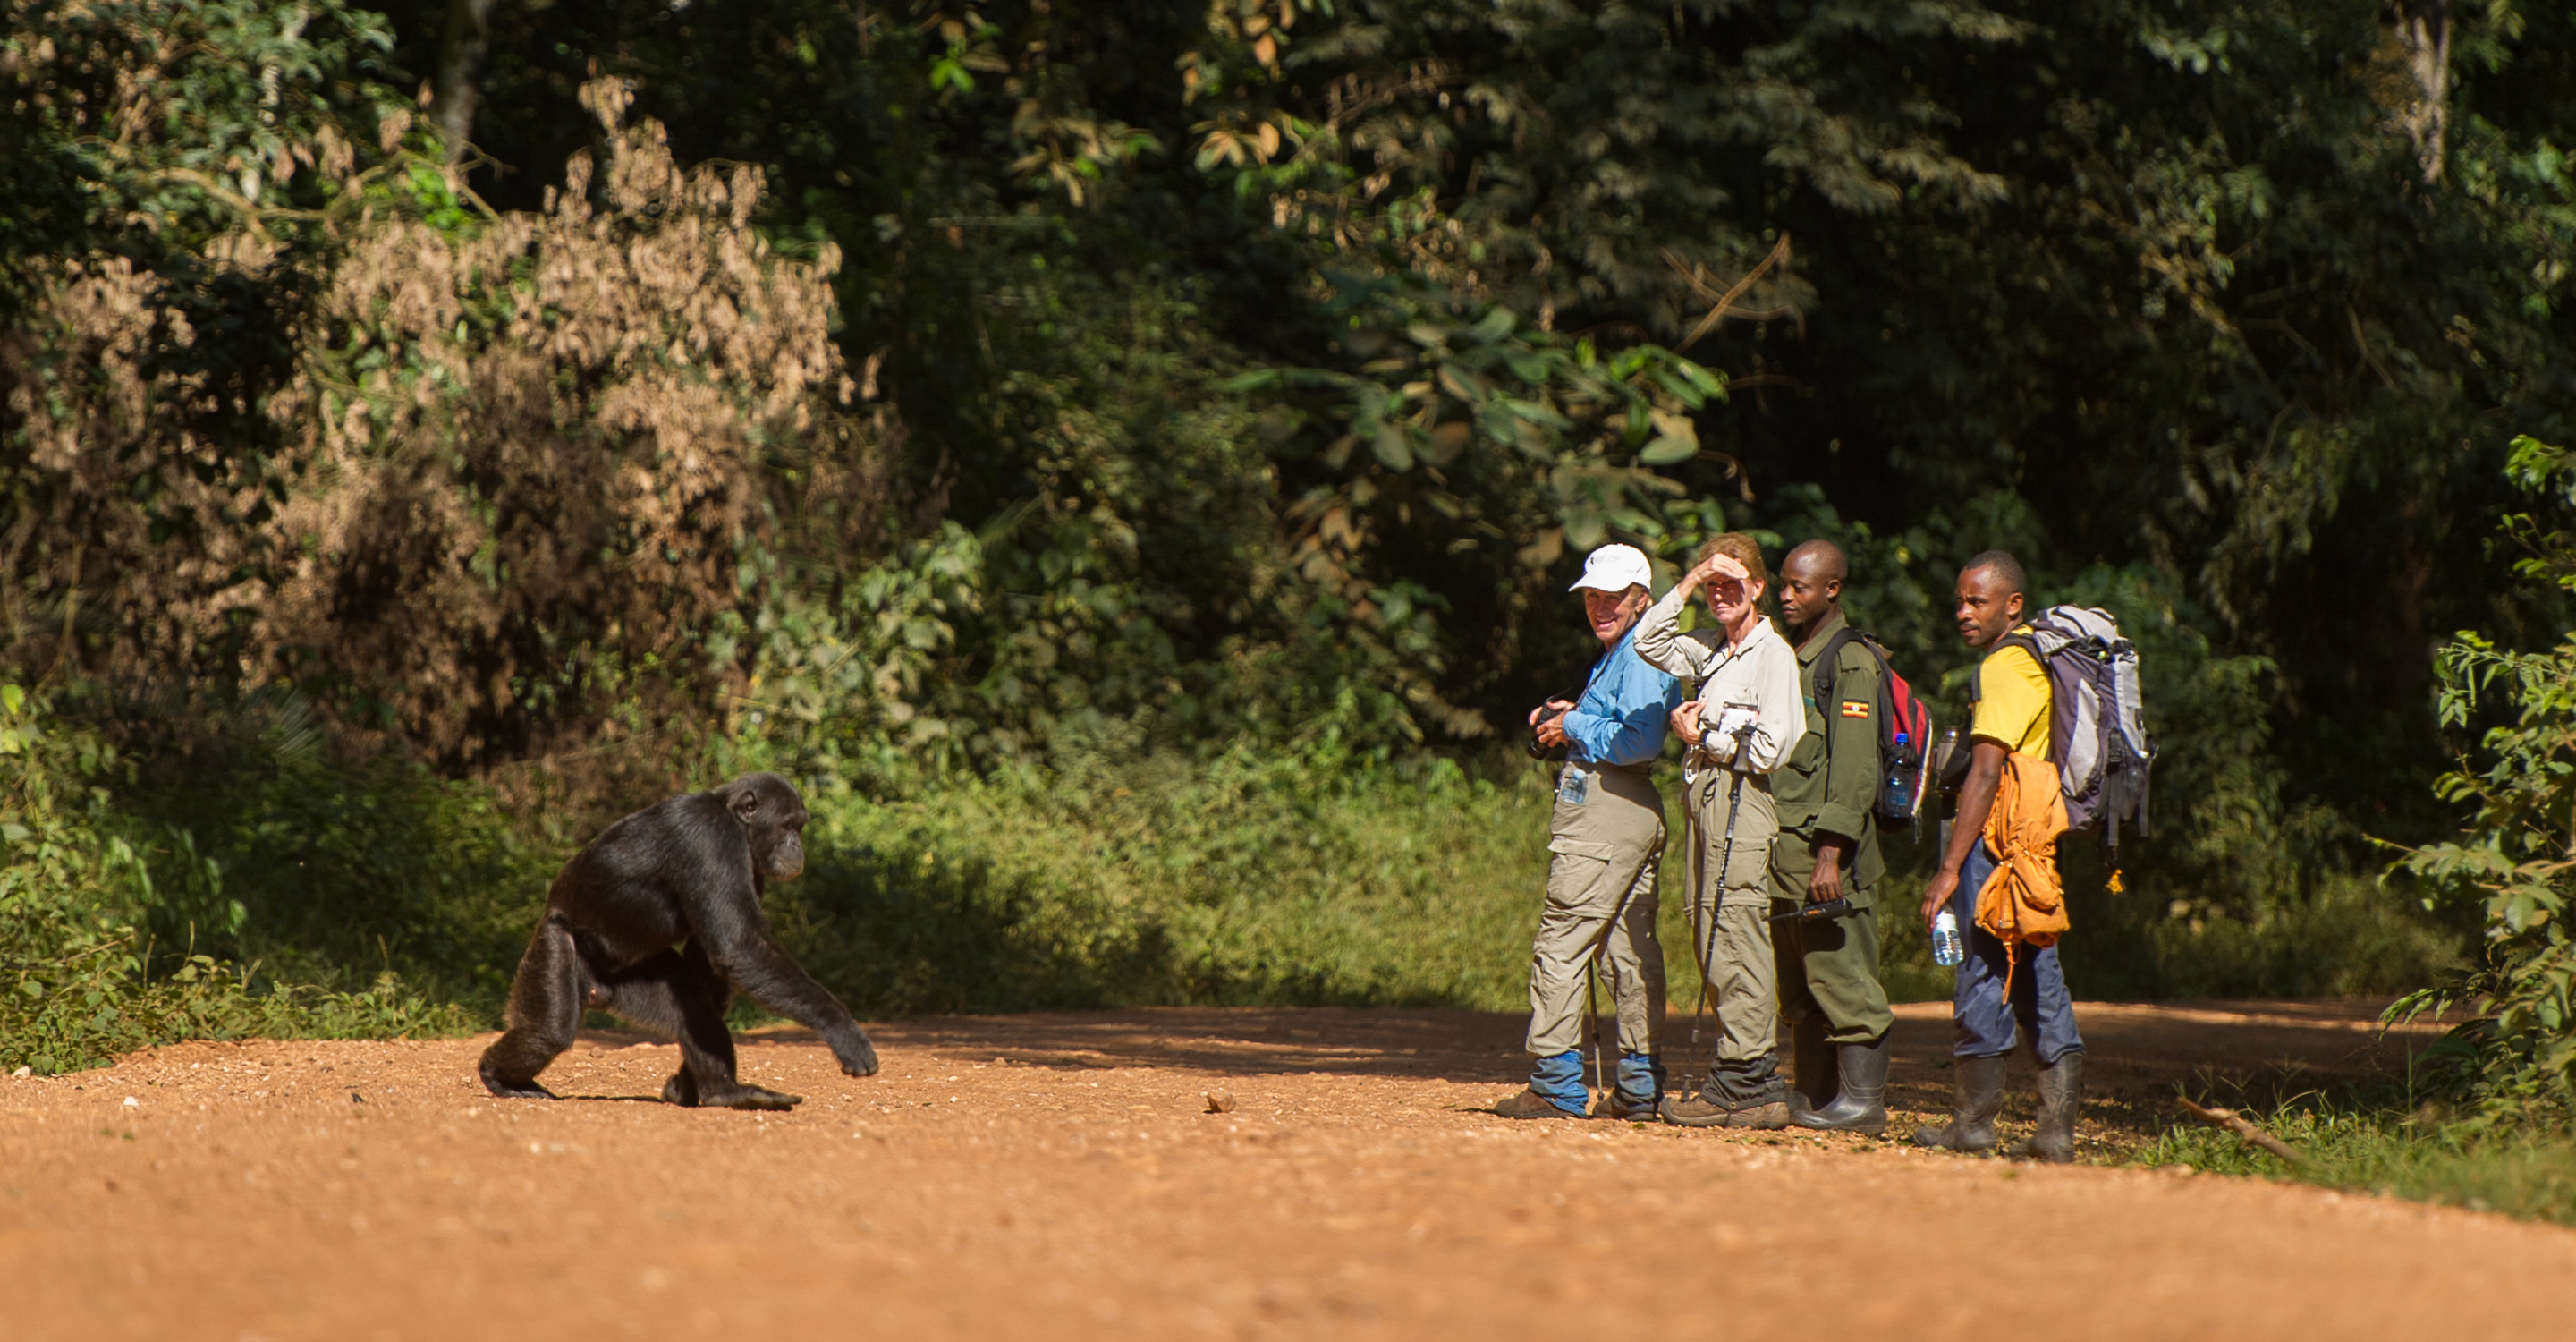 Travelers come across a chimpanzee while hiking in Kibale National Park